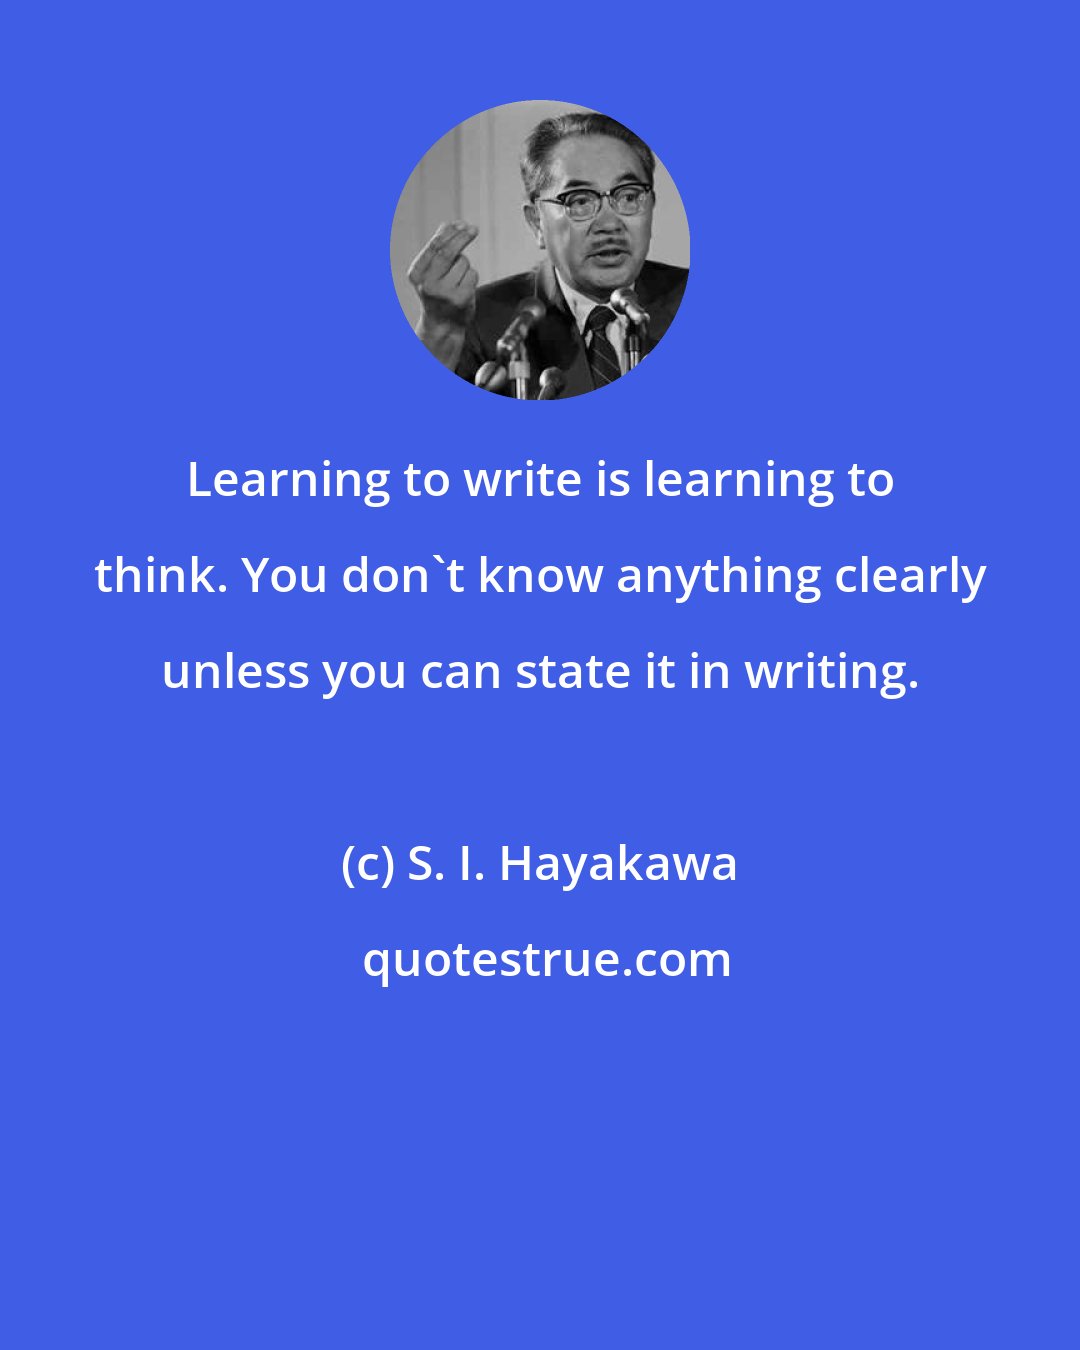 S. I. Hayakawa: Learning to write is learning to think. You don't know anything clearly unless you can state it in writing.